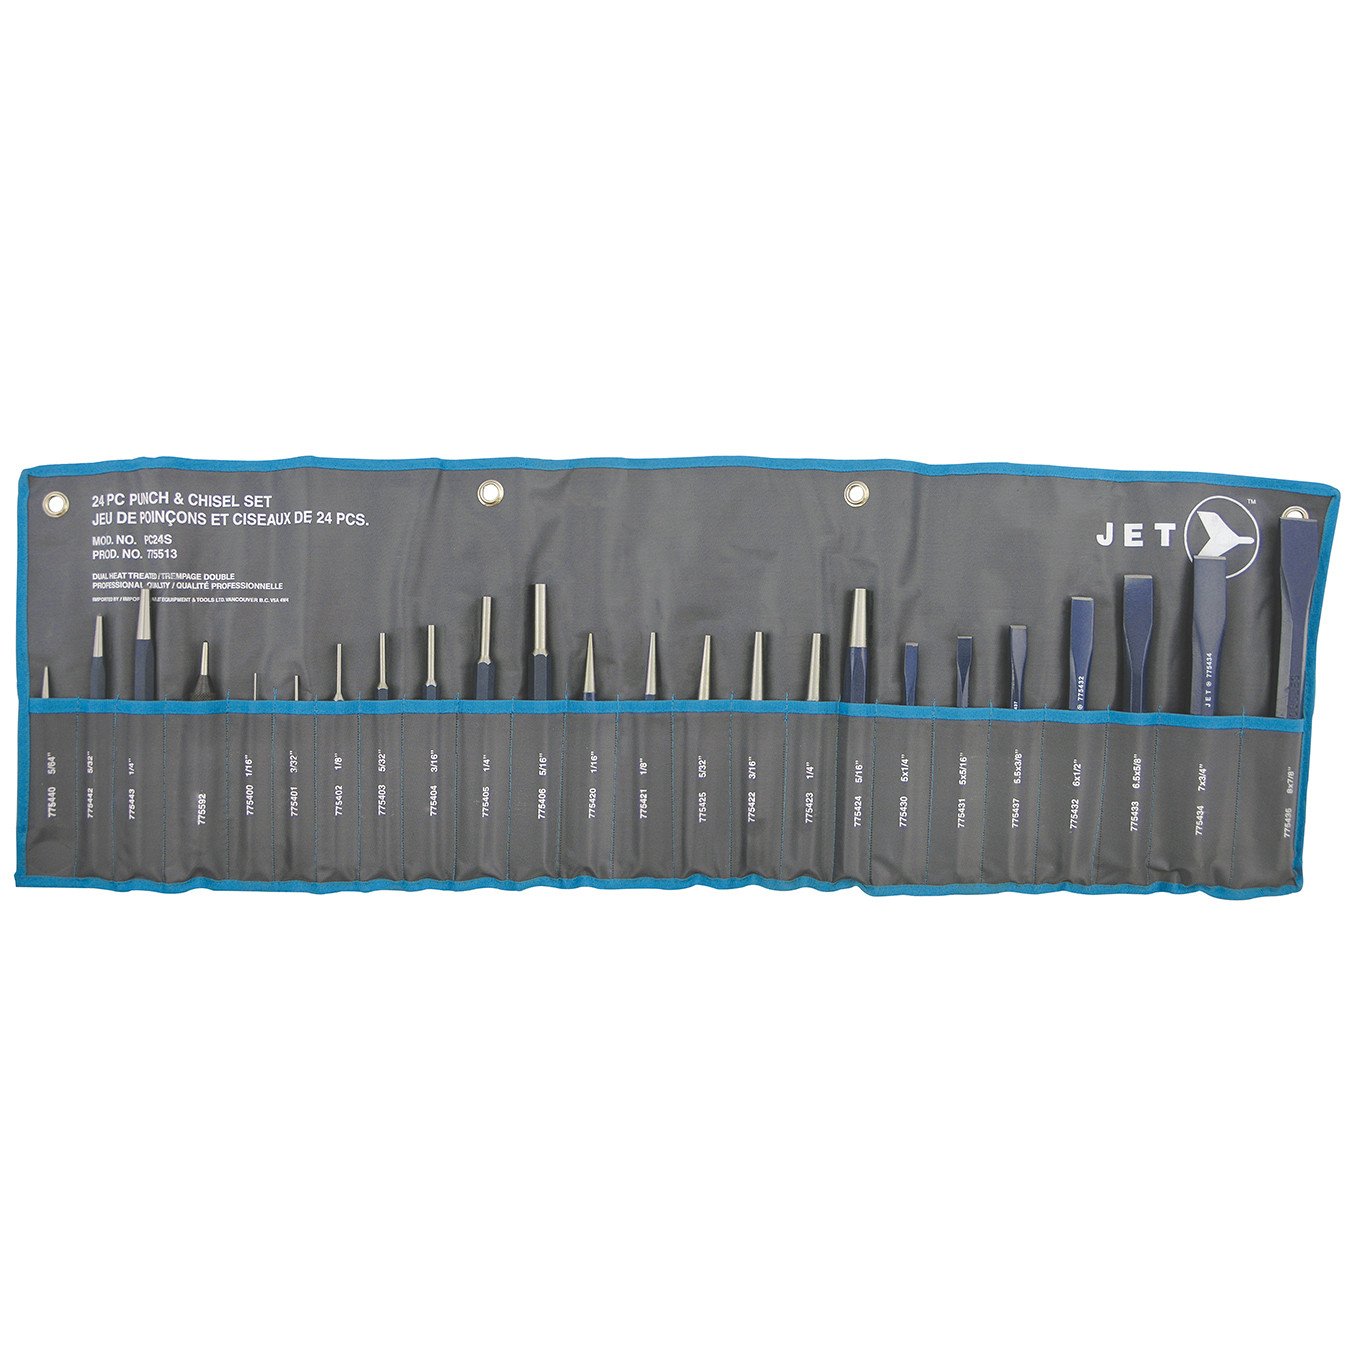 Jet Punch and Chisel Set | 24 Piece Hand Tools - Cleanflow